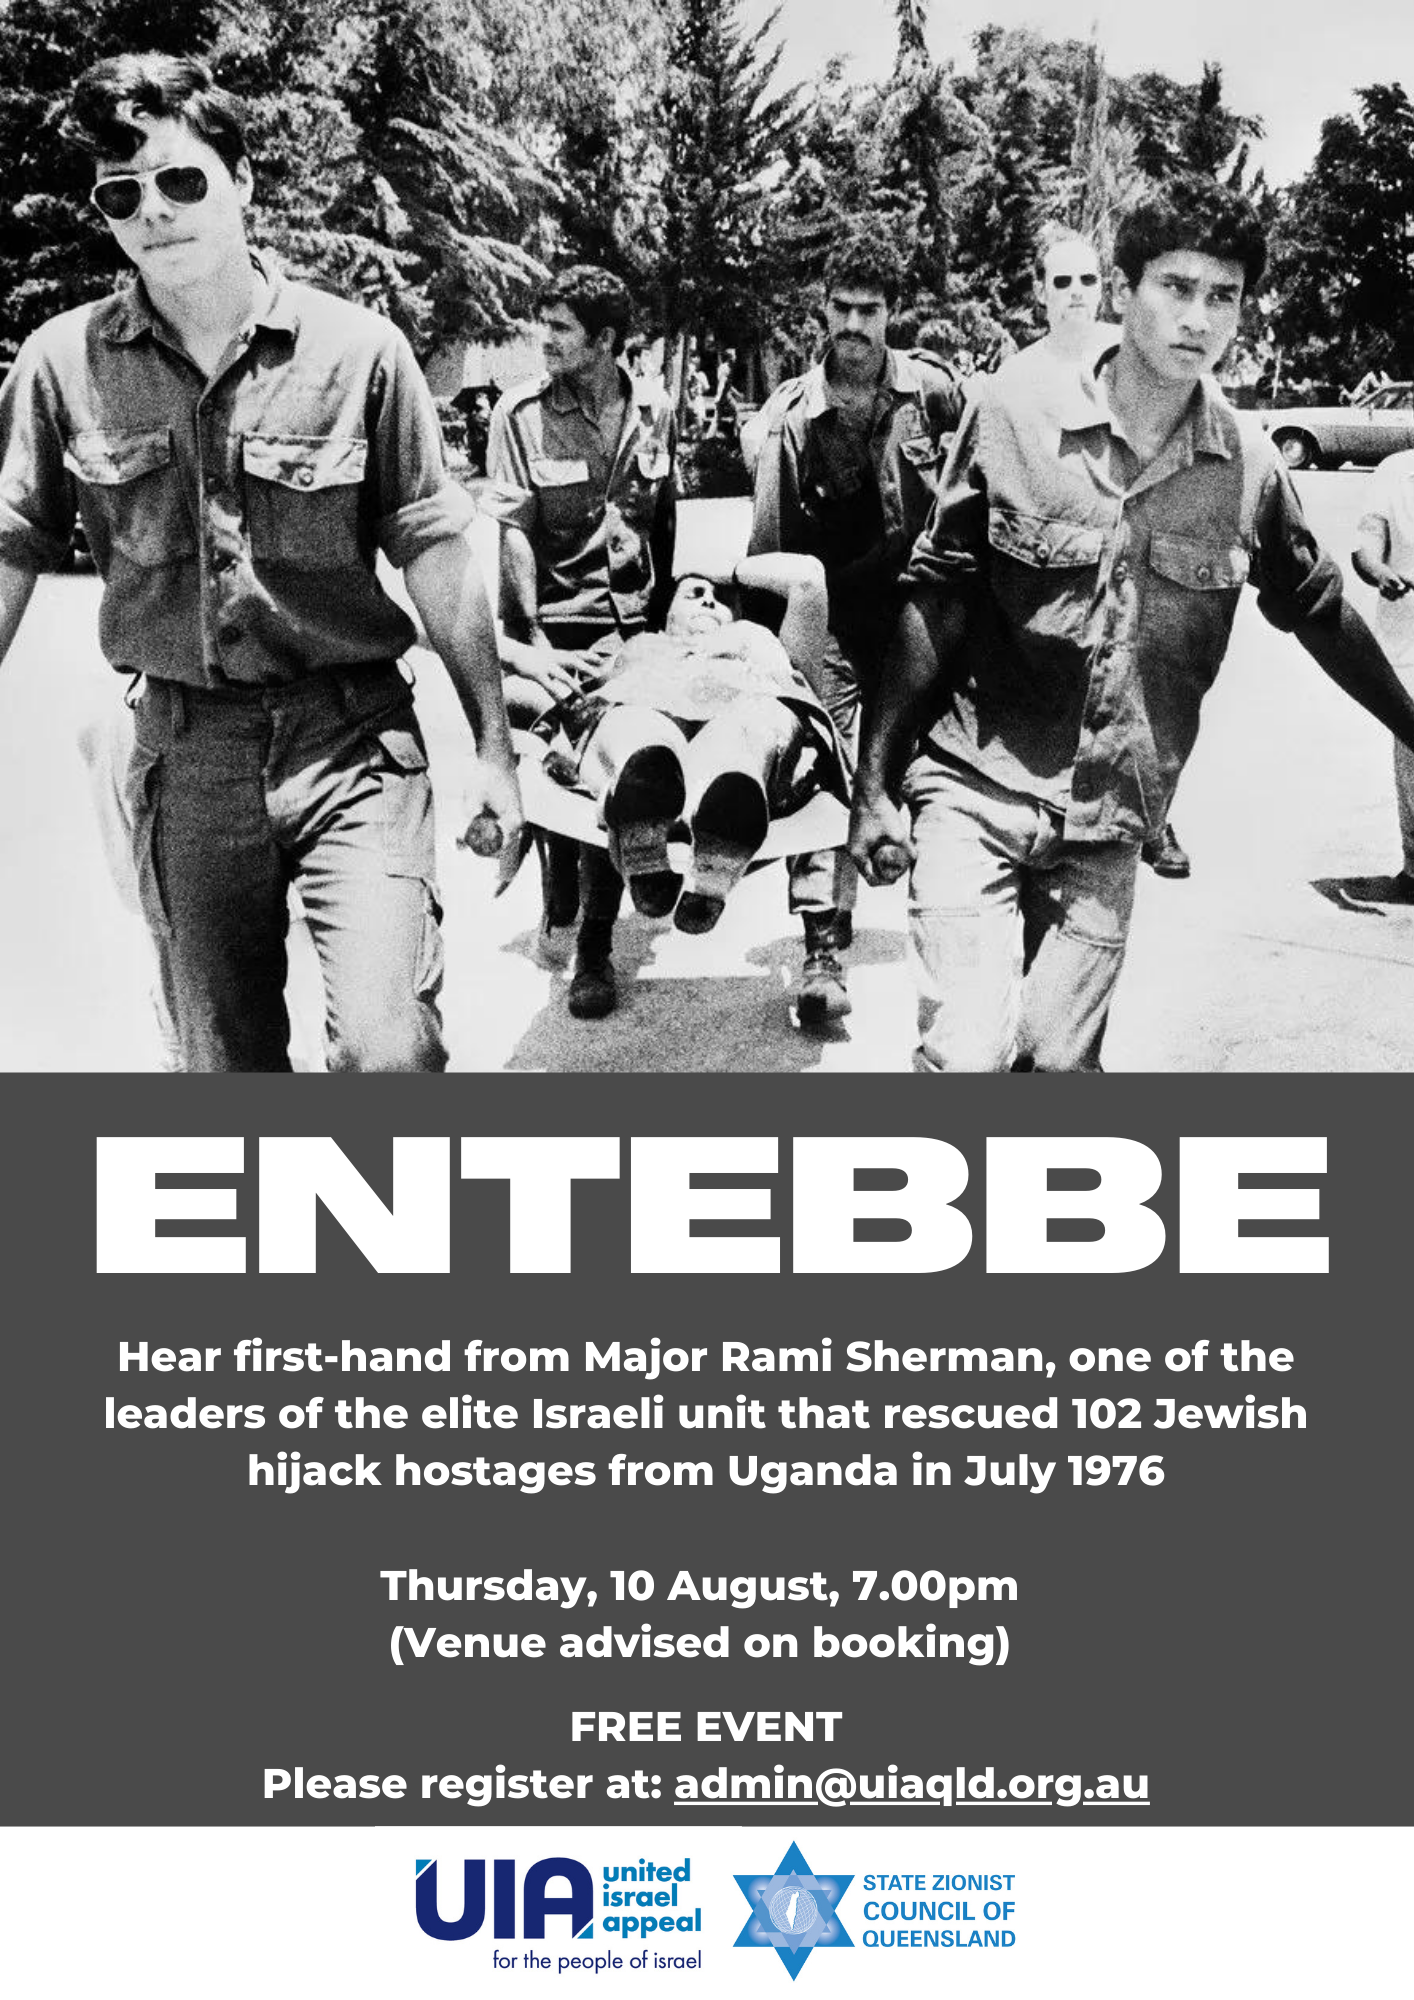 Special Entebbe evening with Rami Sherman